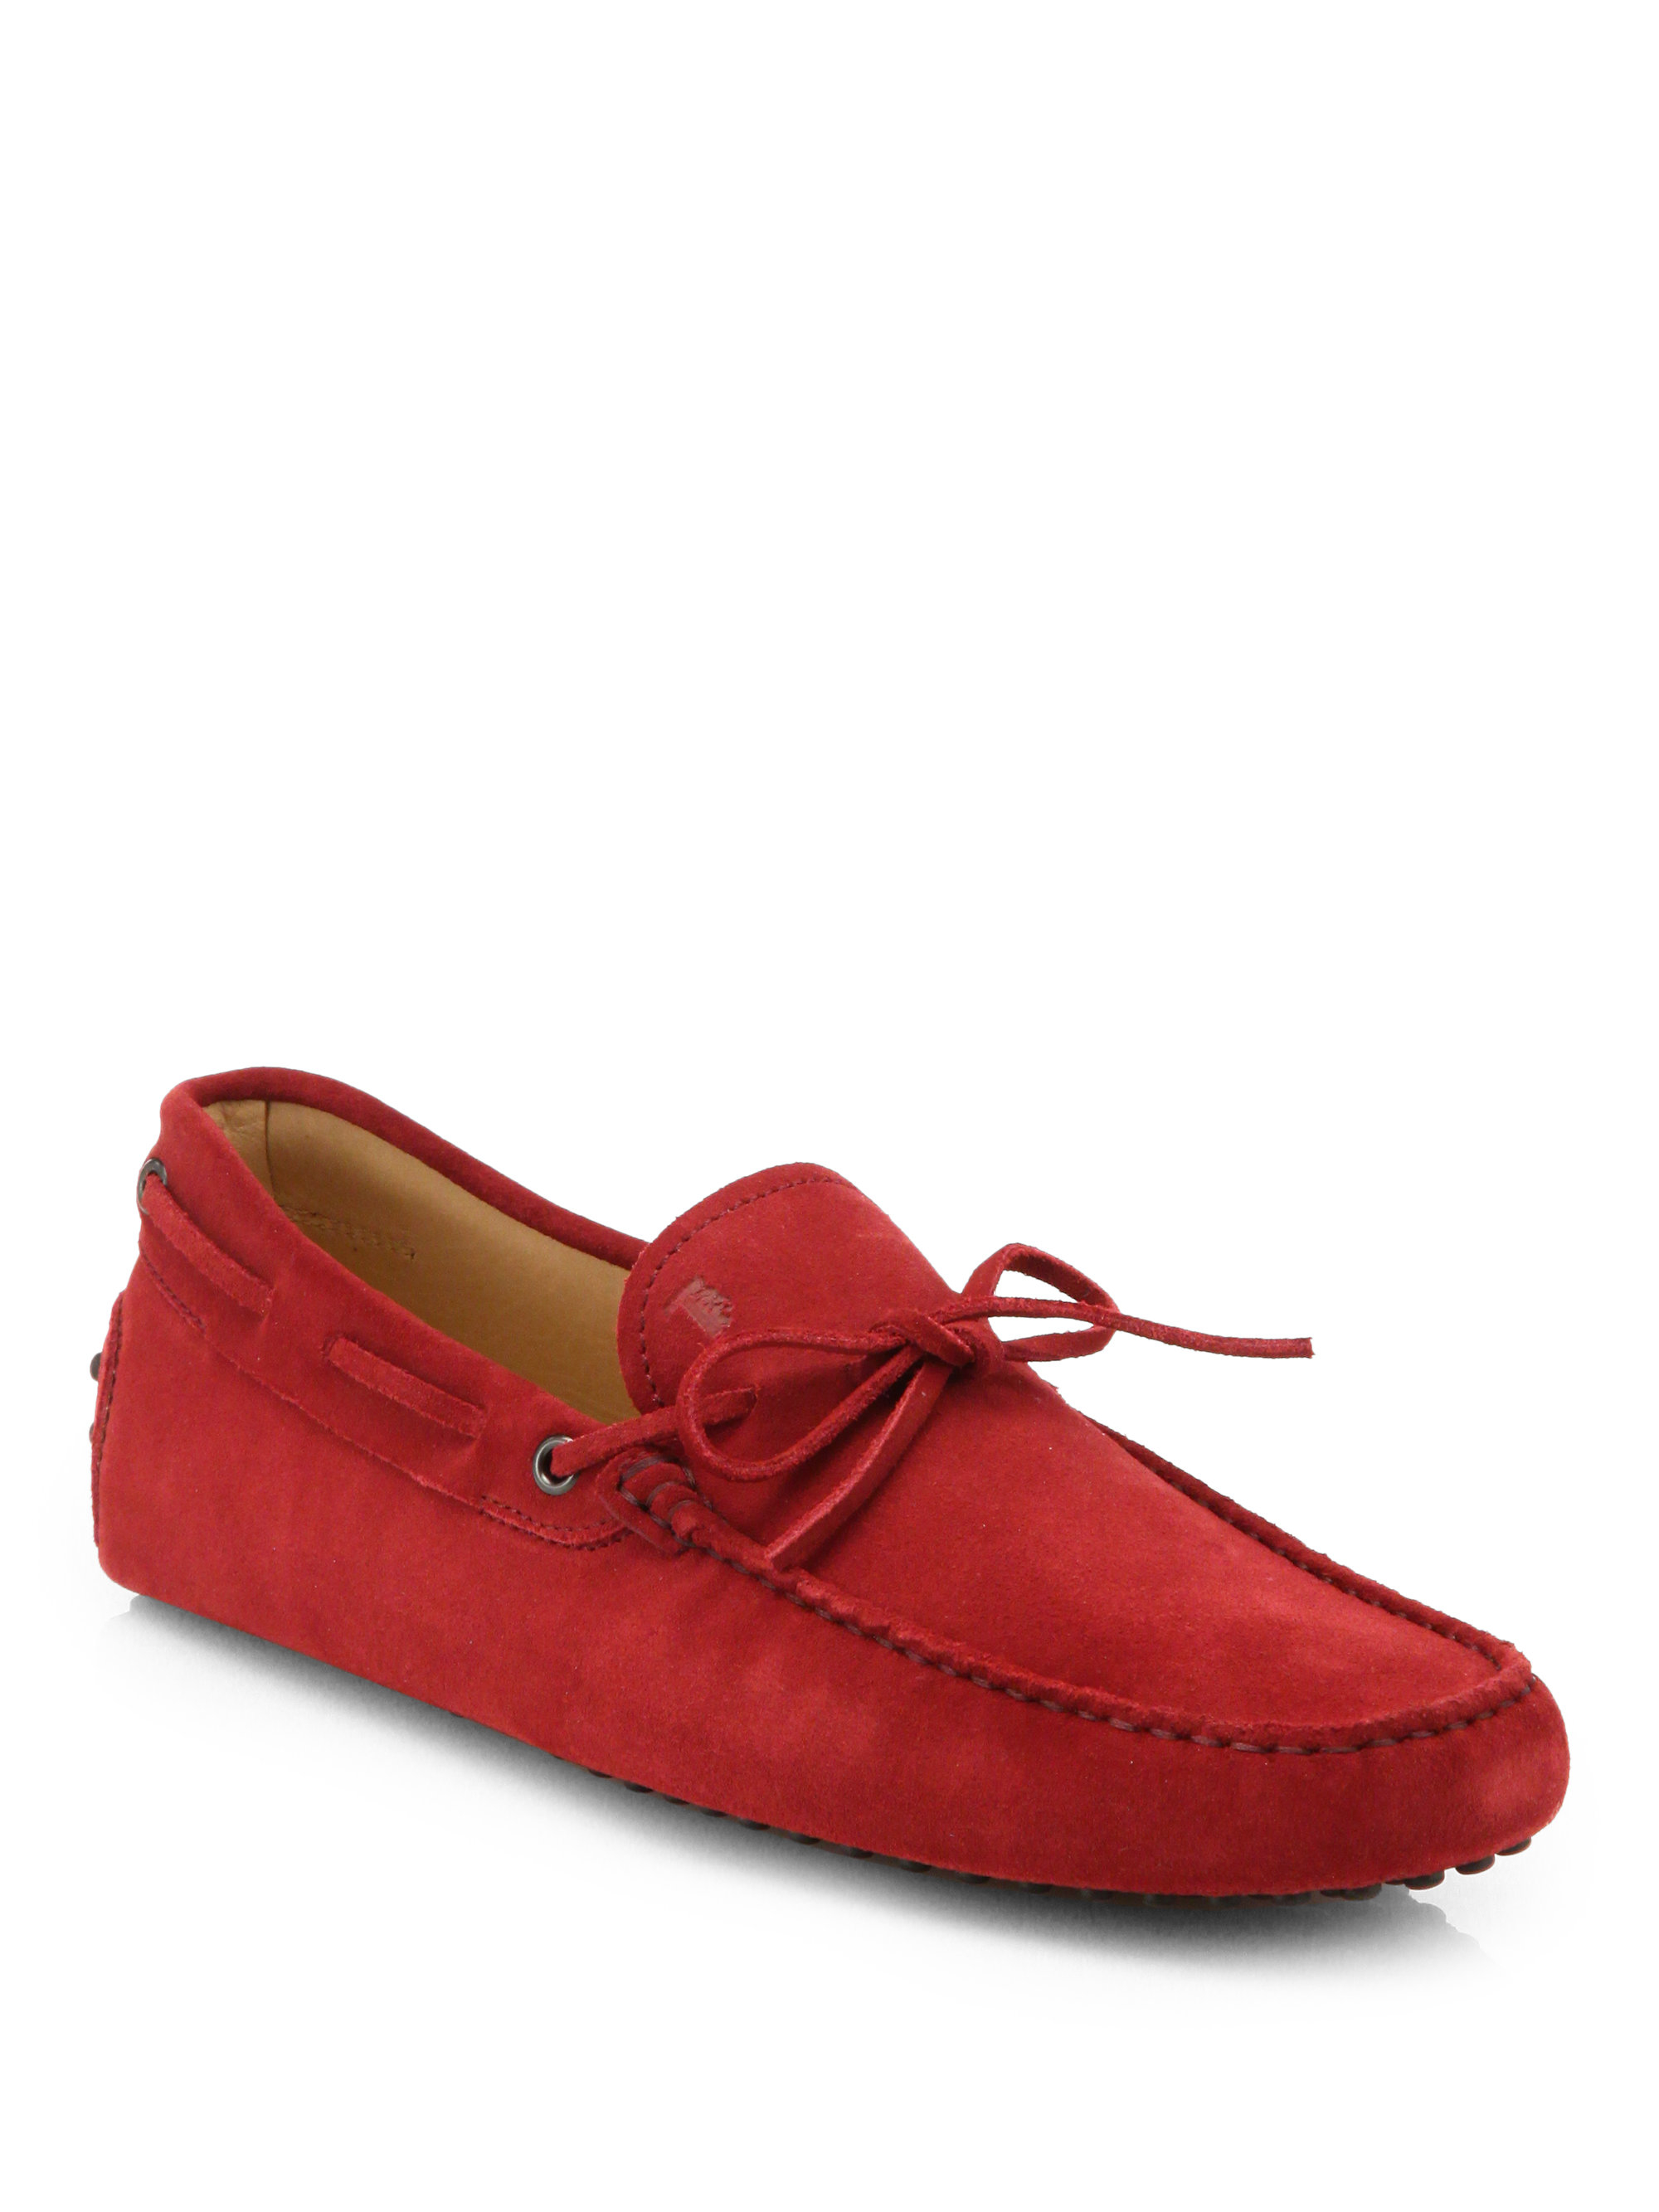 Lyst - Tod'S Gommino Suede Moccasins in Red for Men